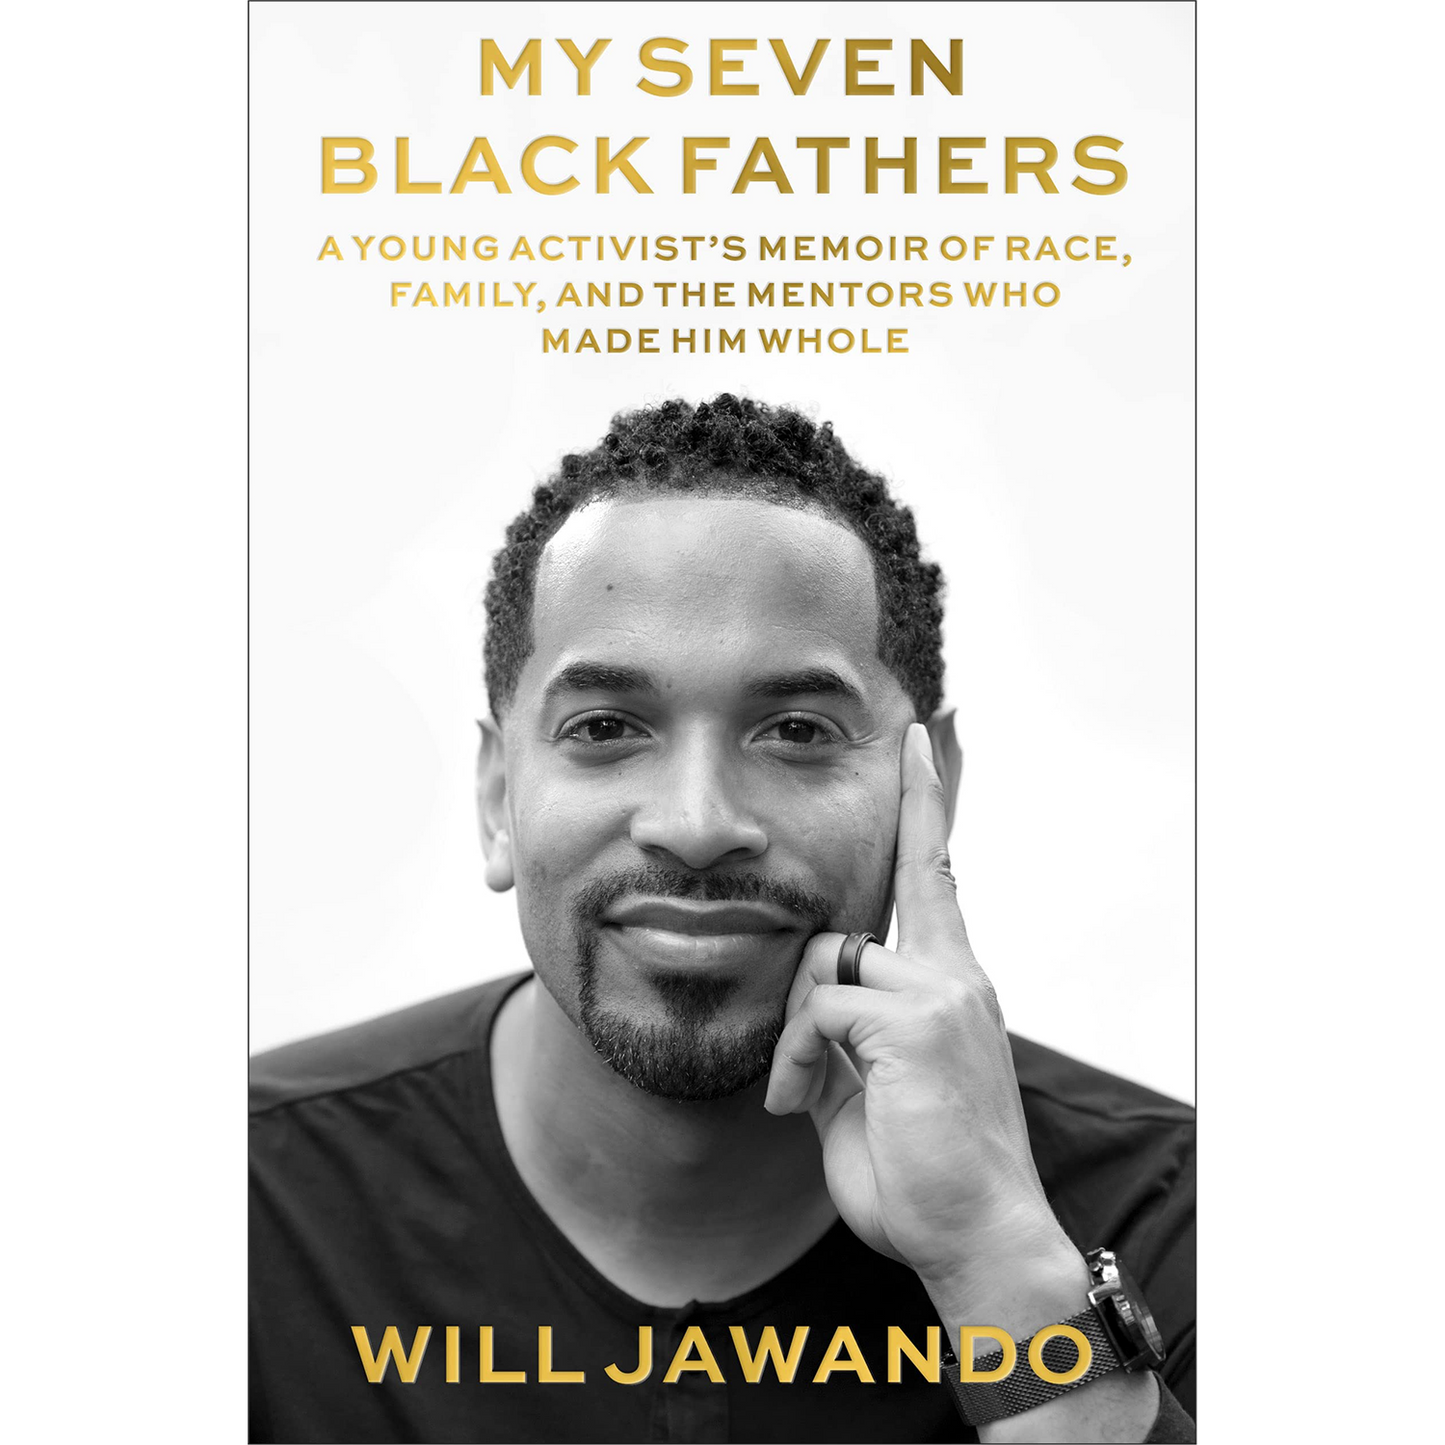 My Seven Black Fathers: A Young Activist's Memoir of Race, Family, and the Mentors Who Made Him Whole (Hardcover)